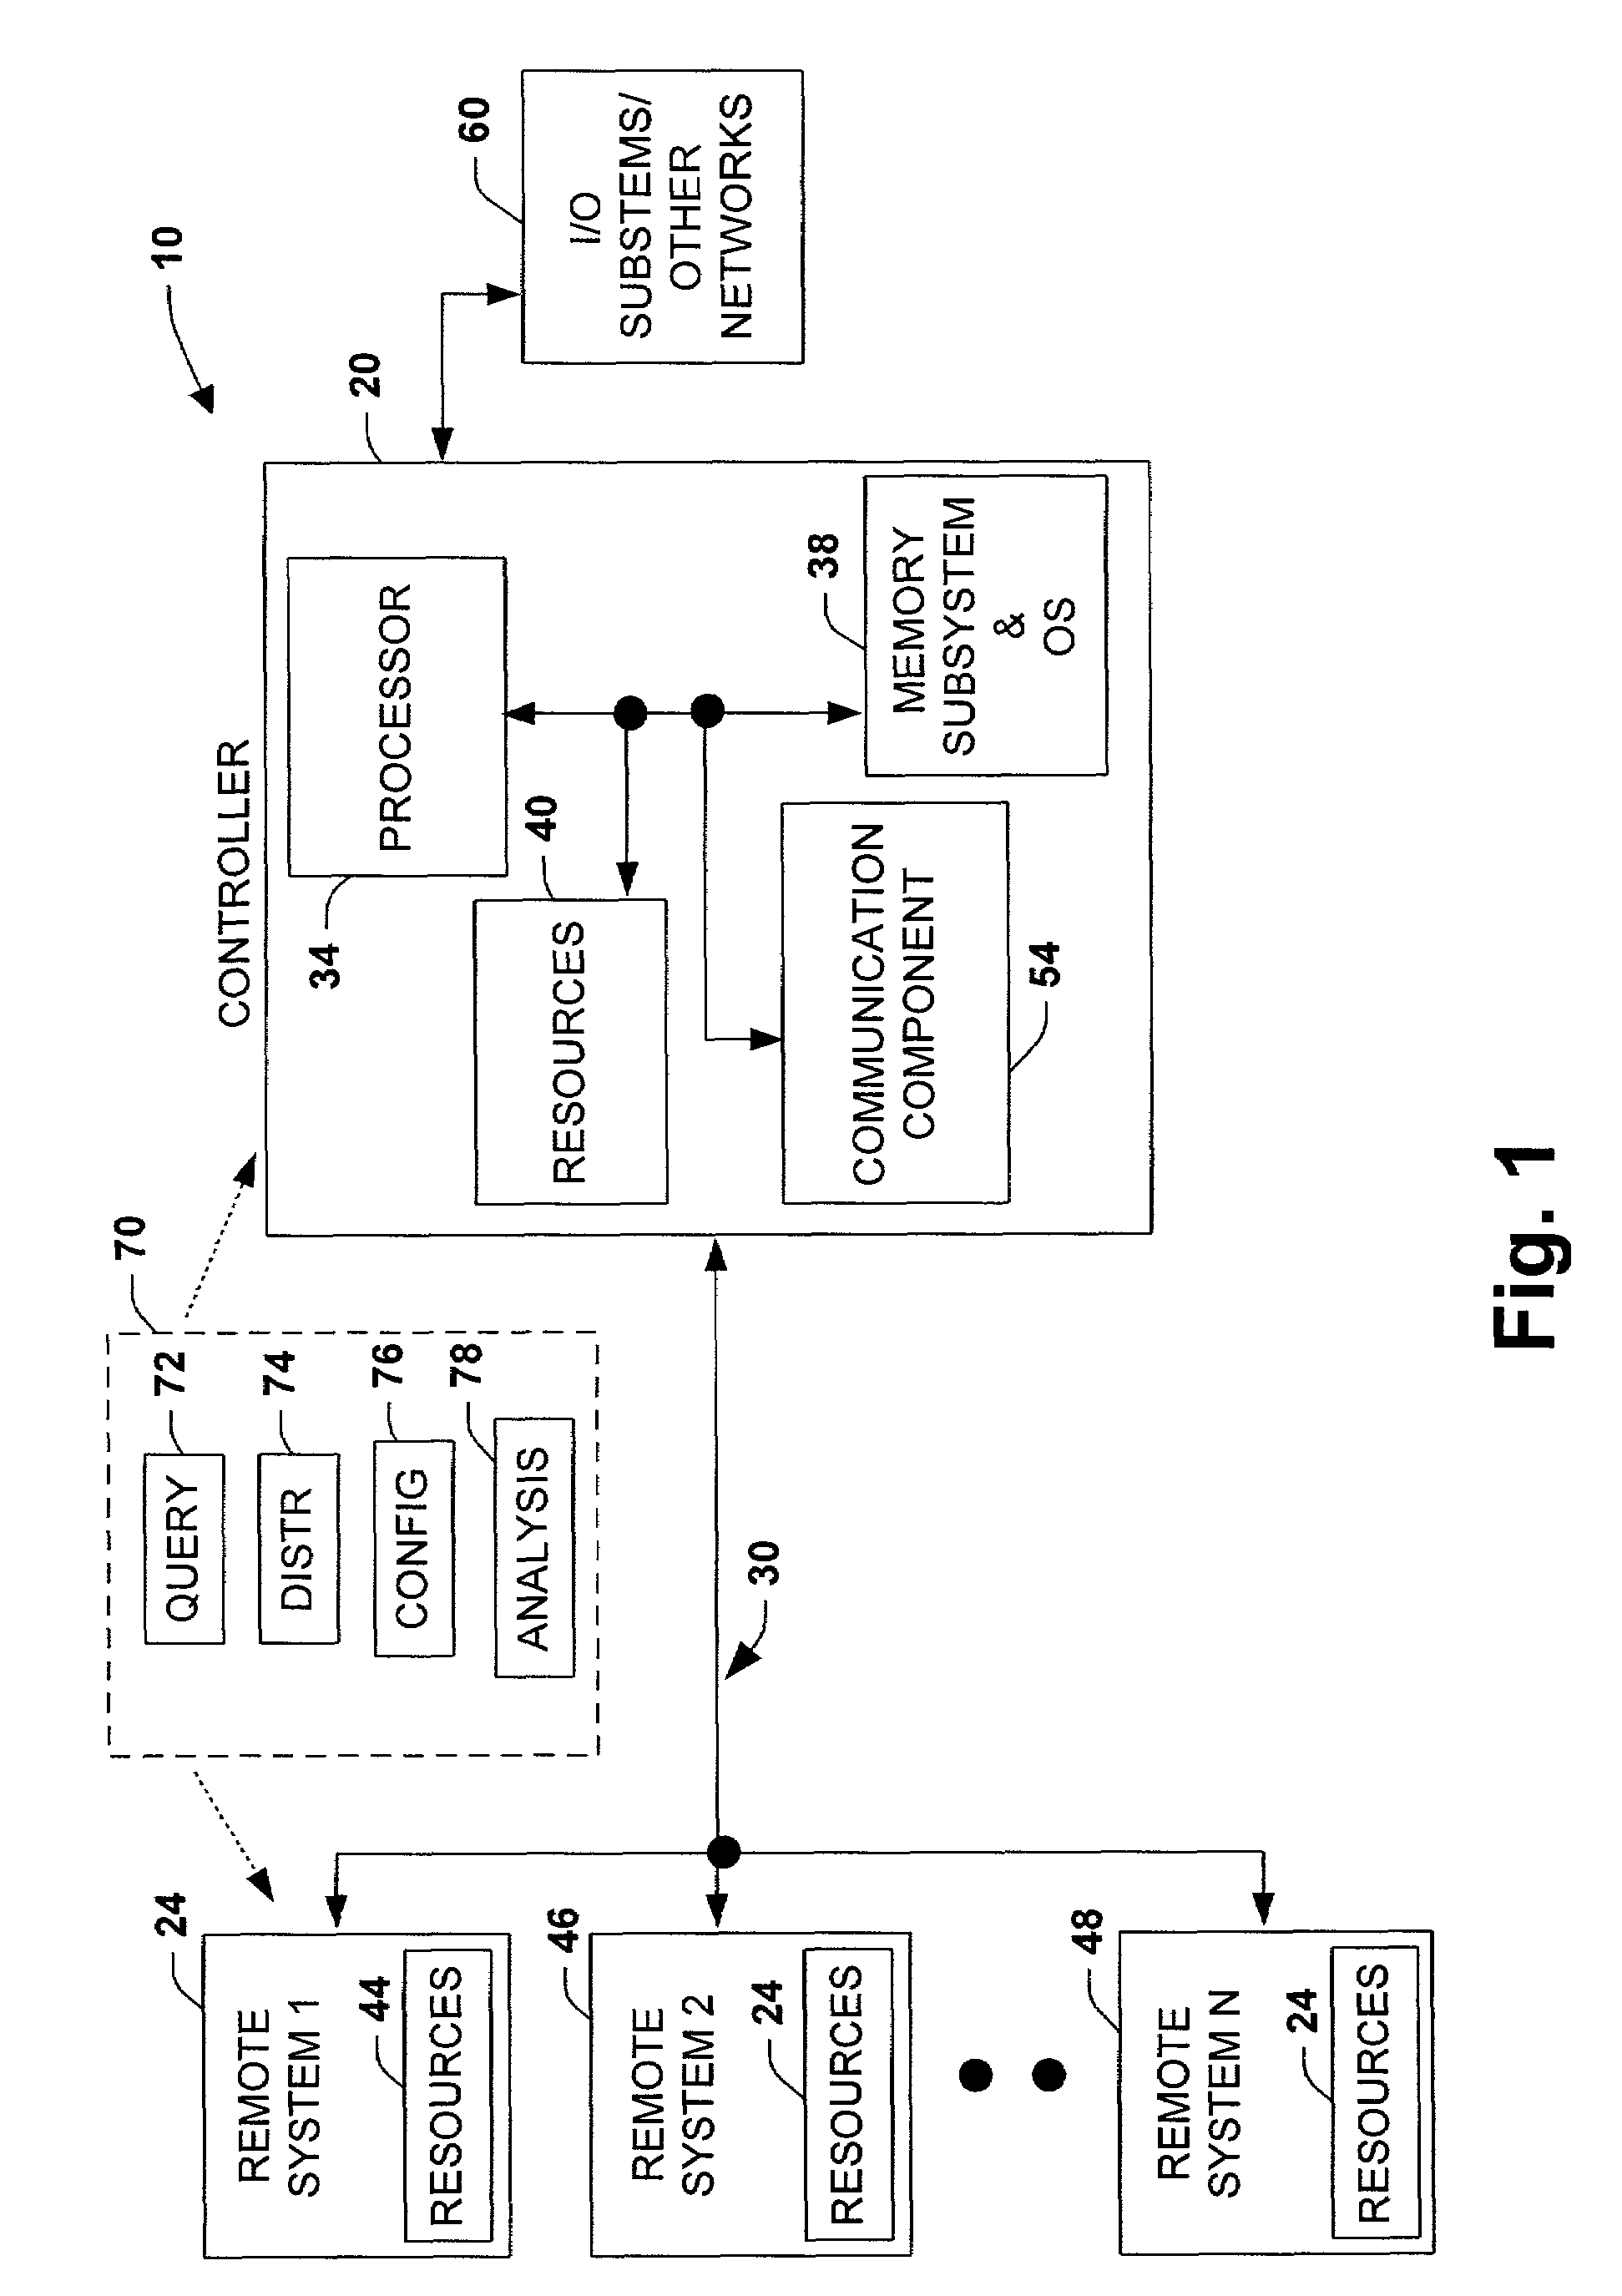 System and methodology providing flexible and distributed processing in an industrial controller environment